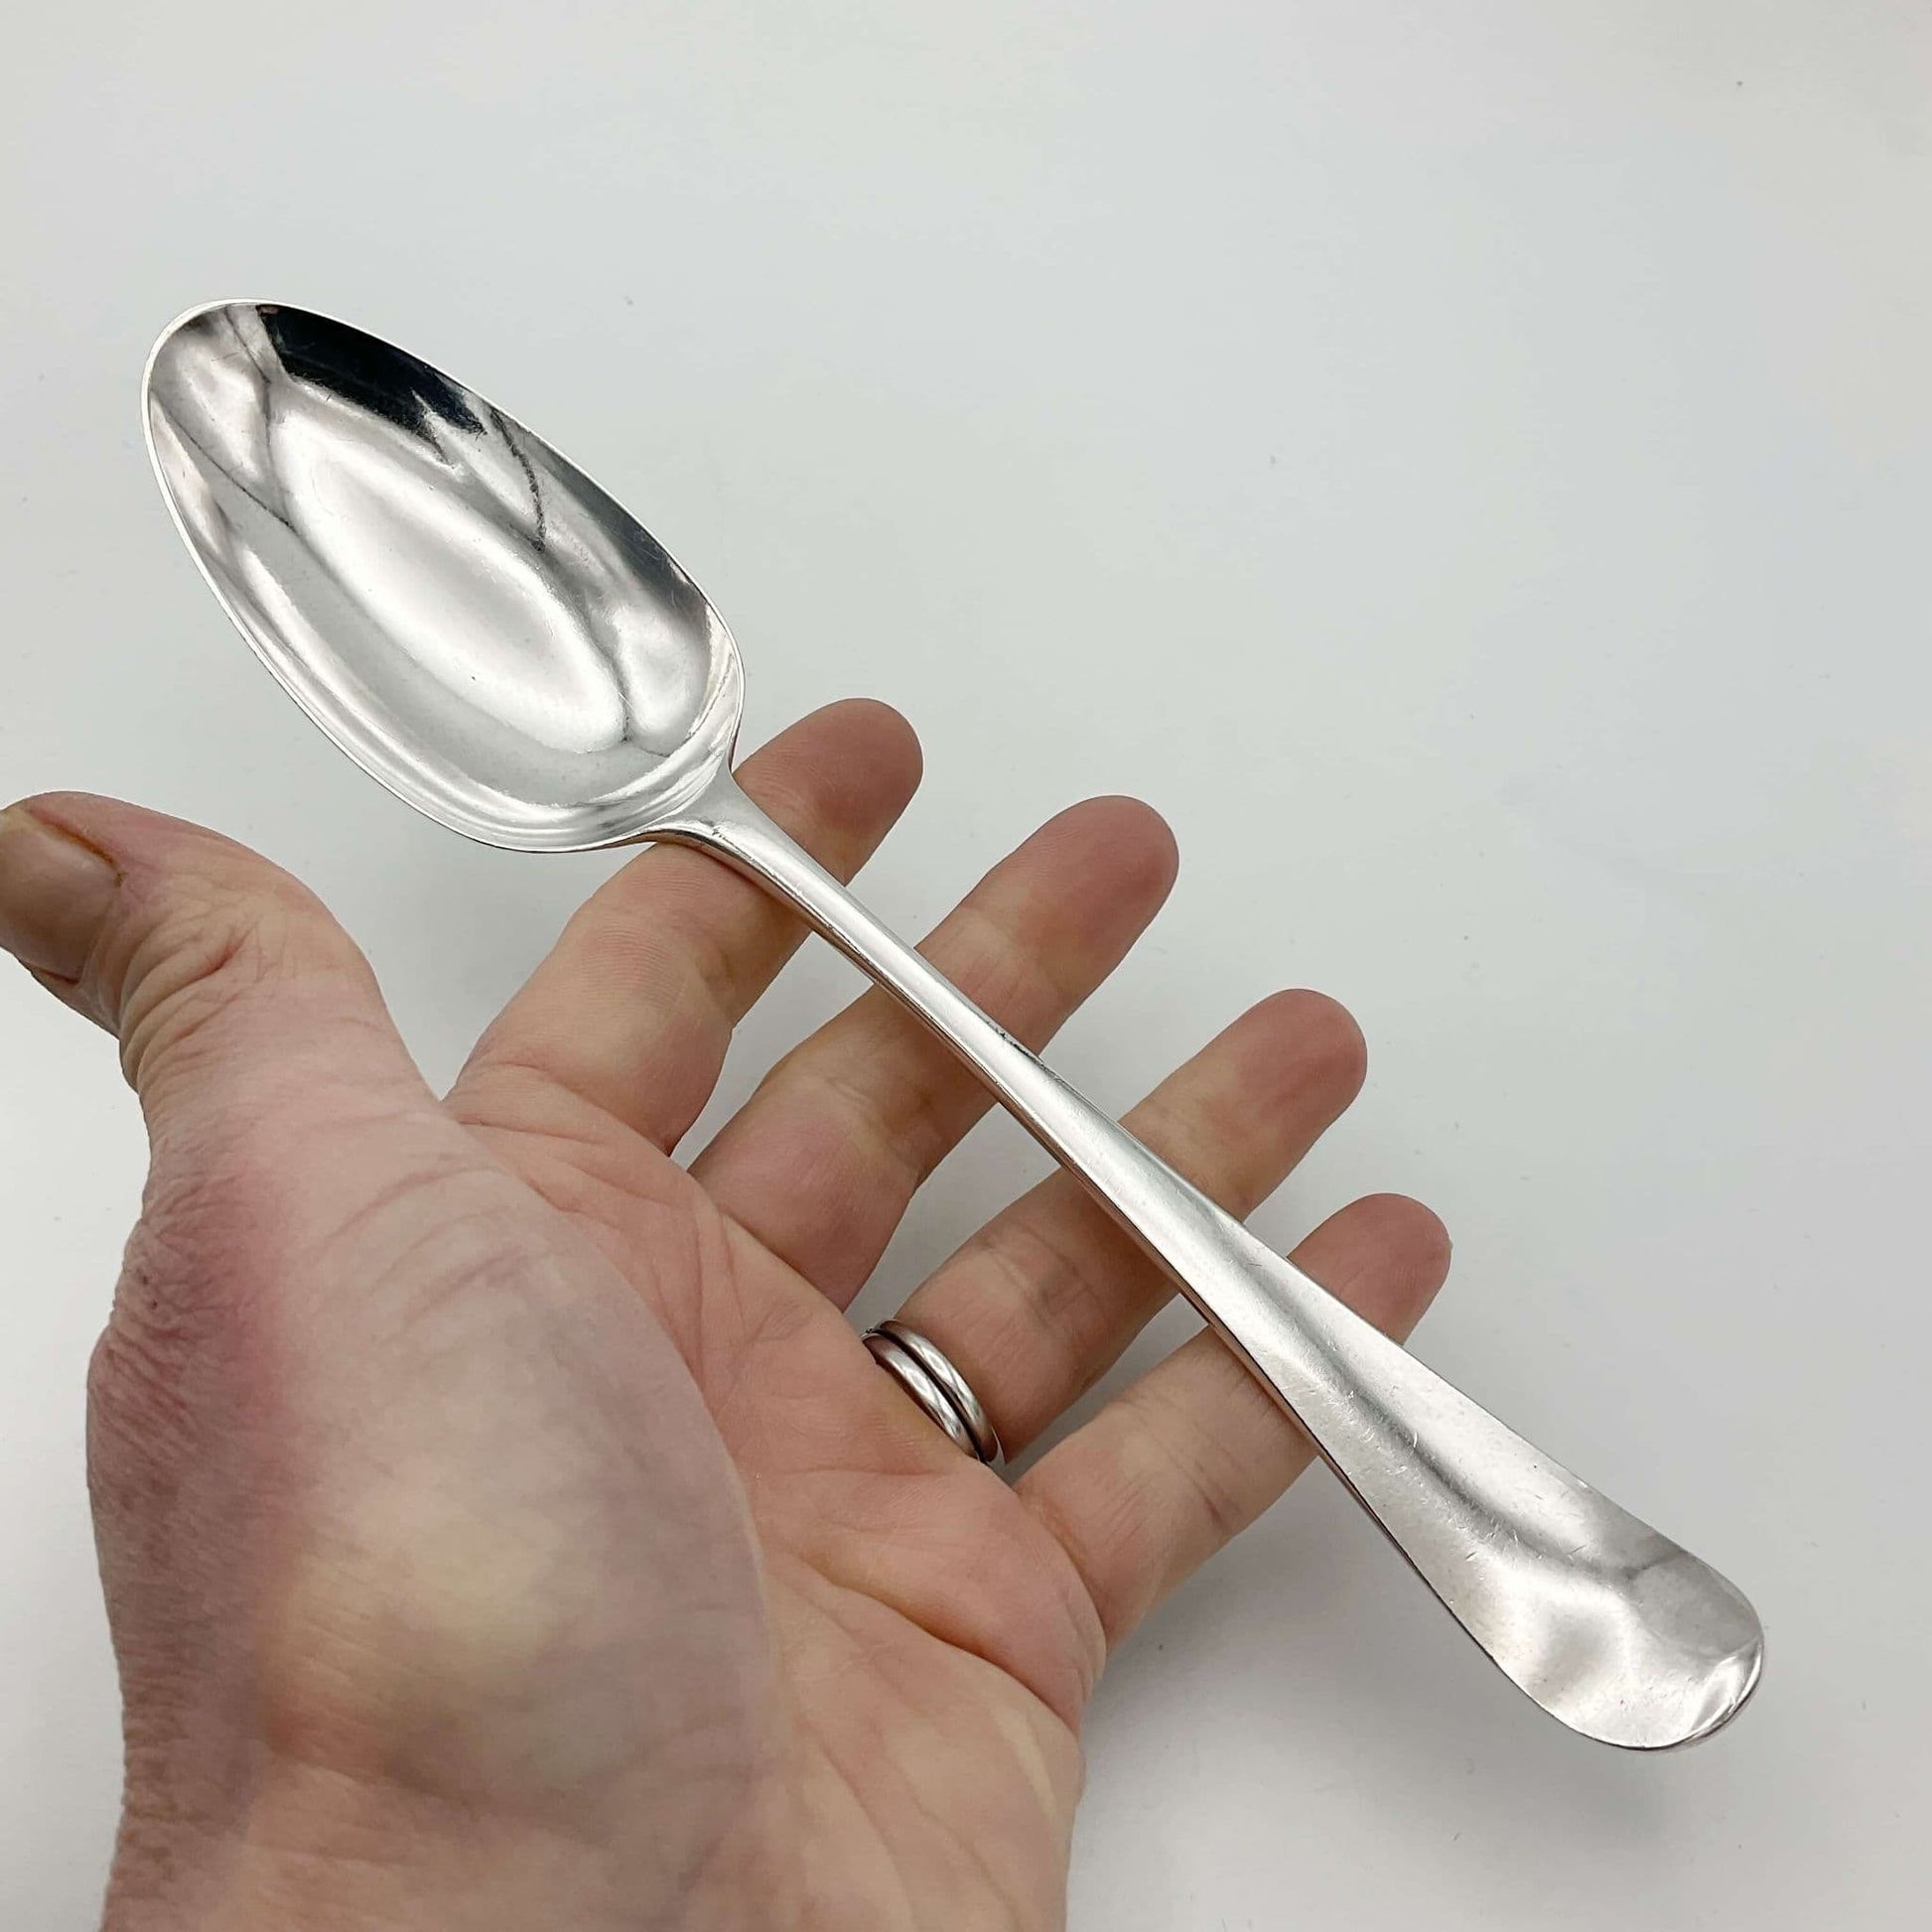 Antique silver serving spoon held in a hand